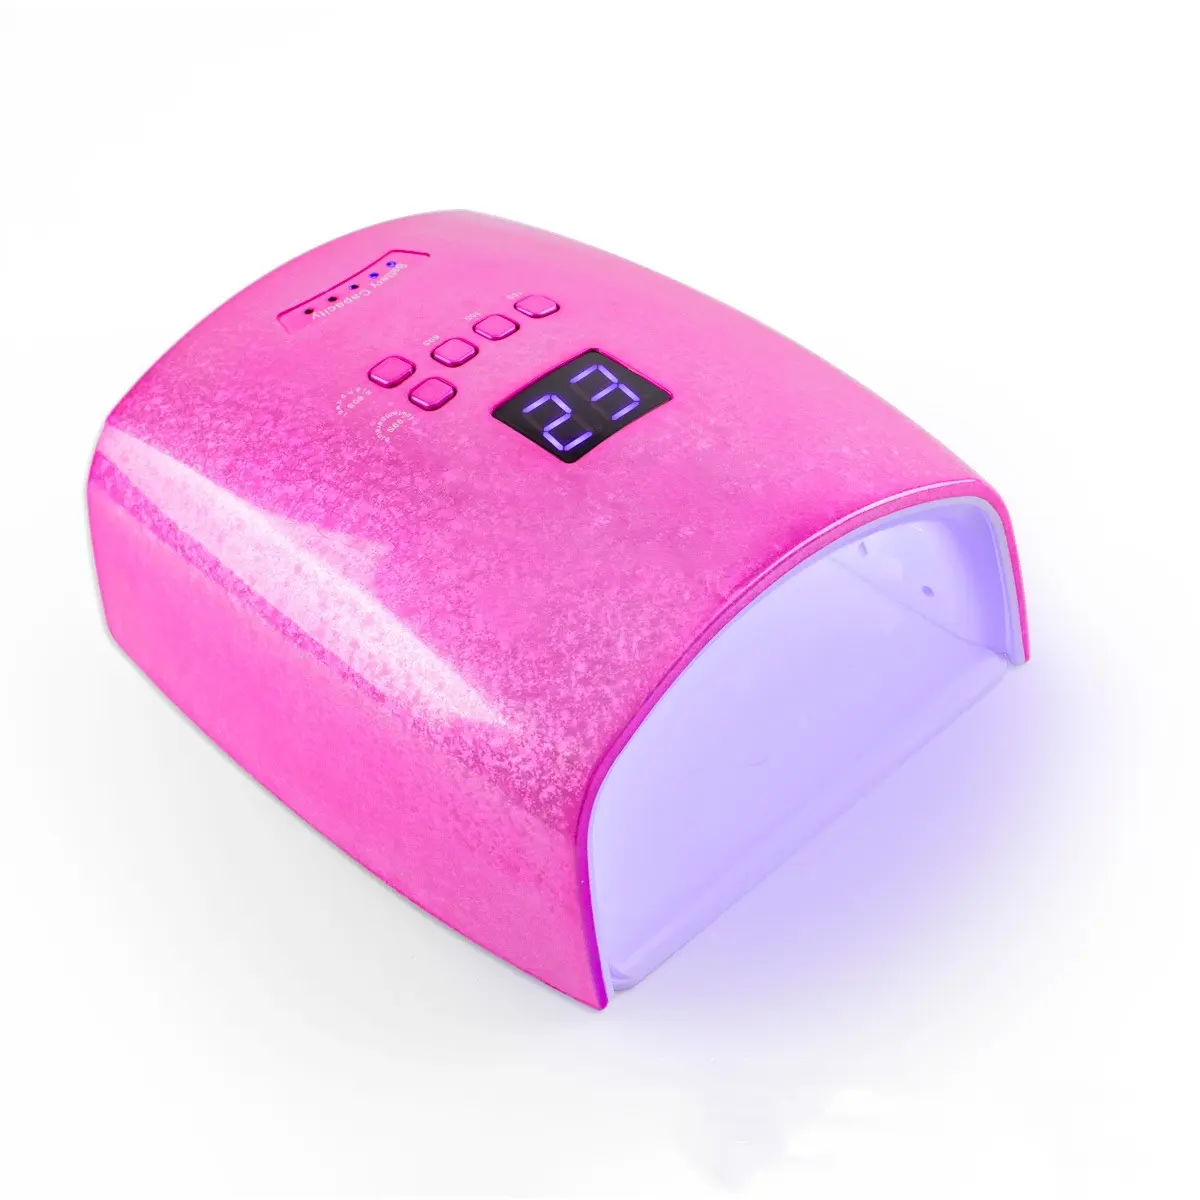 Sun UV Gel Nail Lamp 48W LED Nail Light Fast Nail Dryer For Gel Polish Curing Portable Handle Large Space